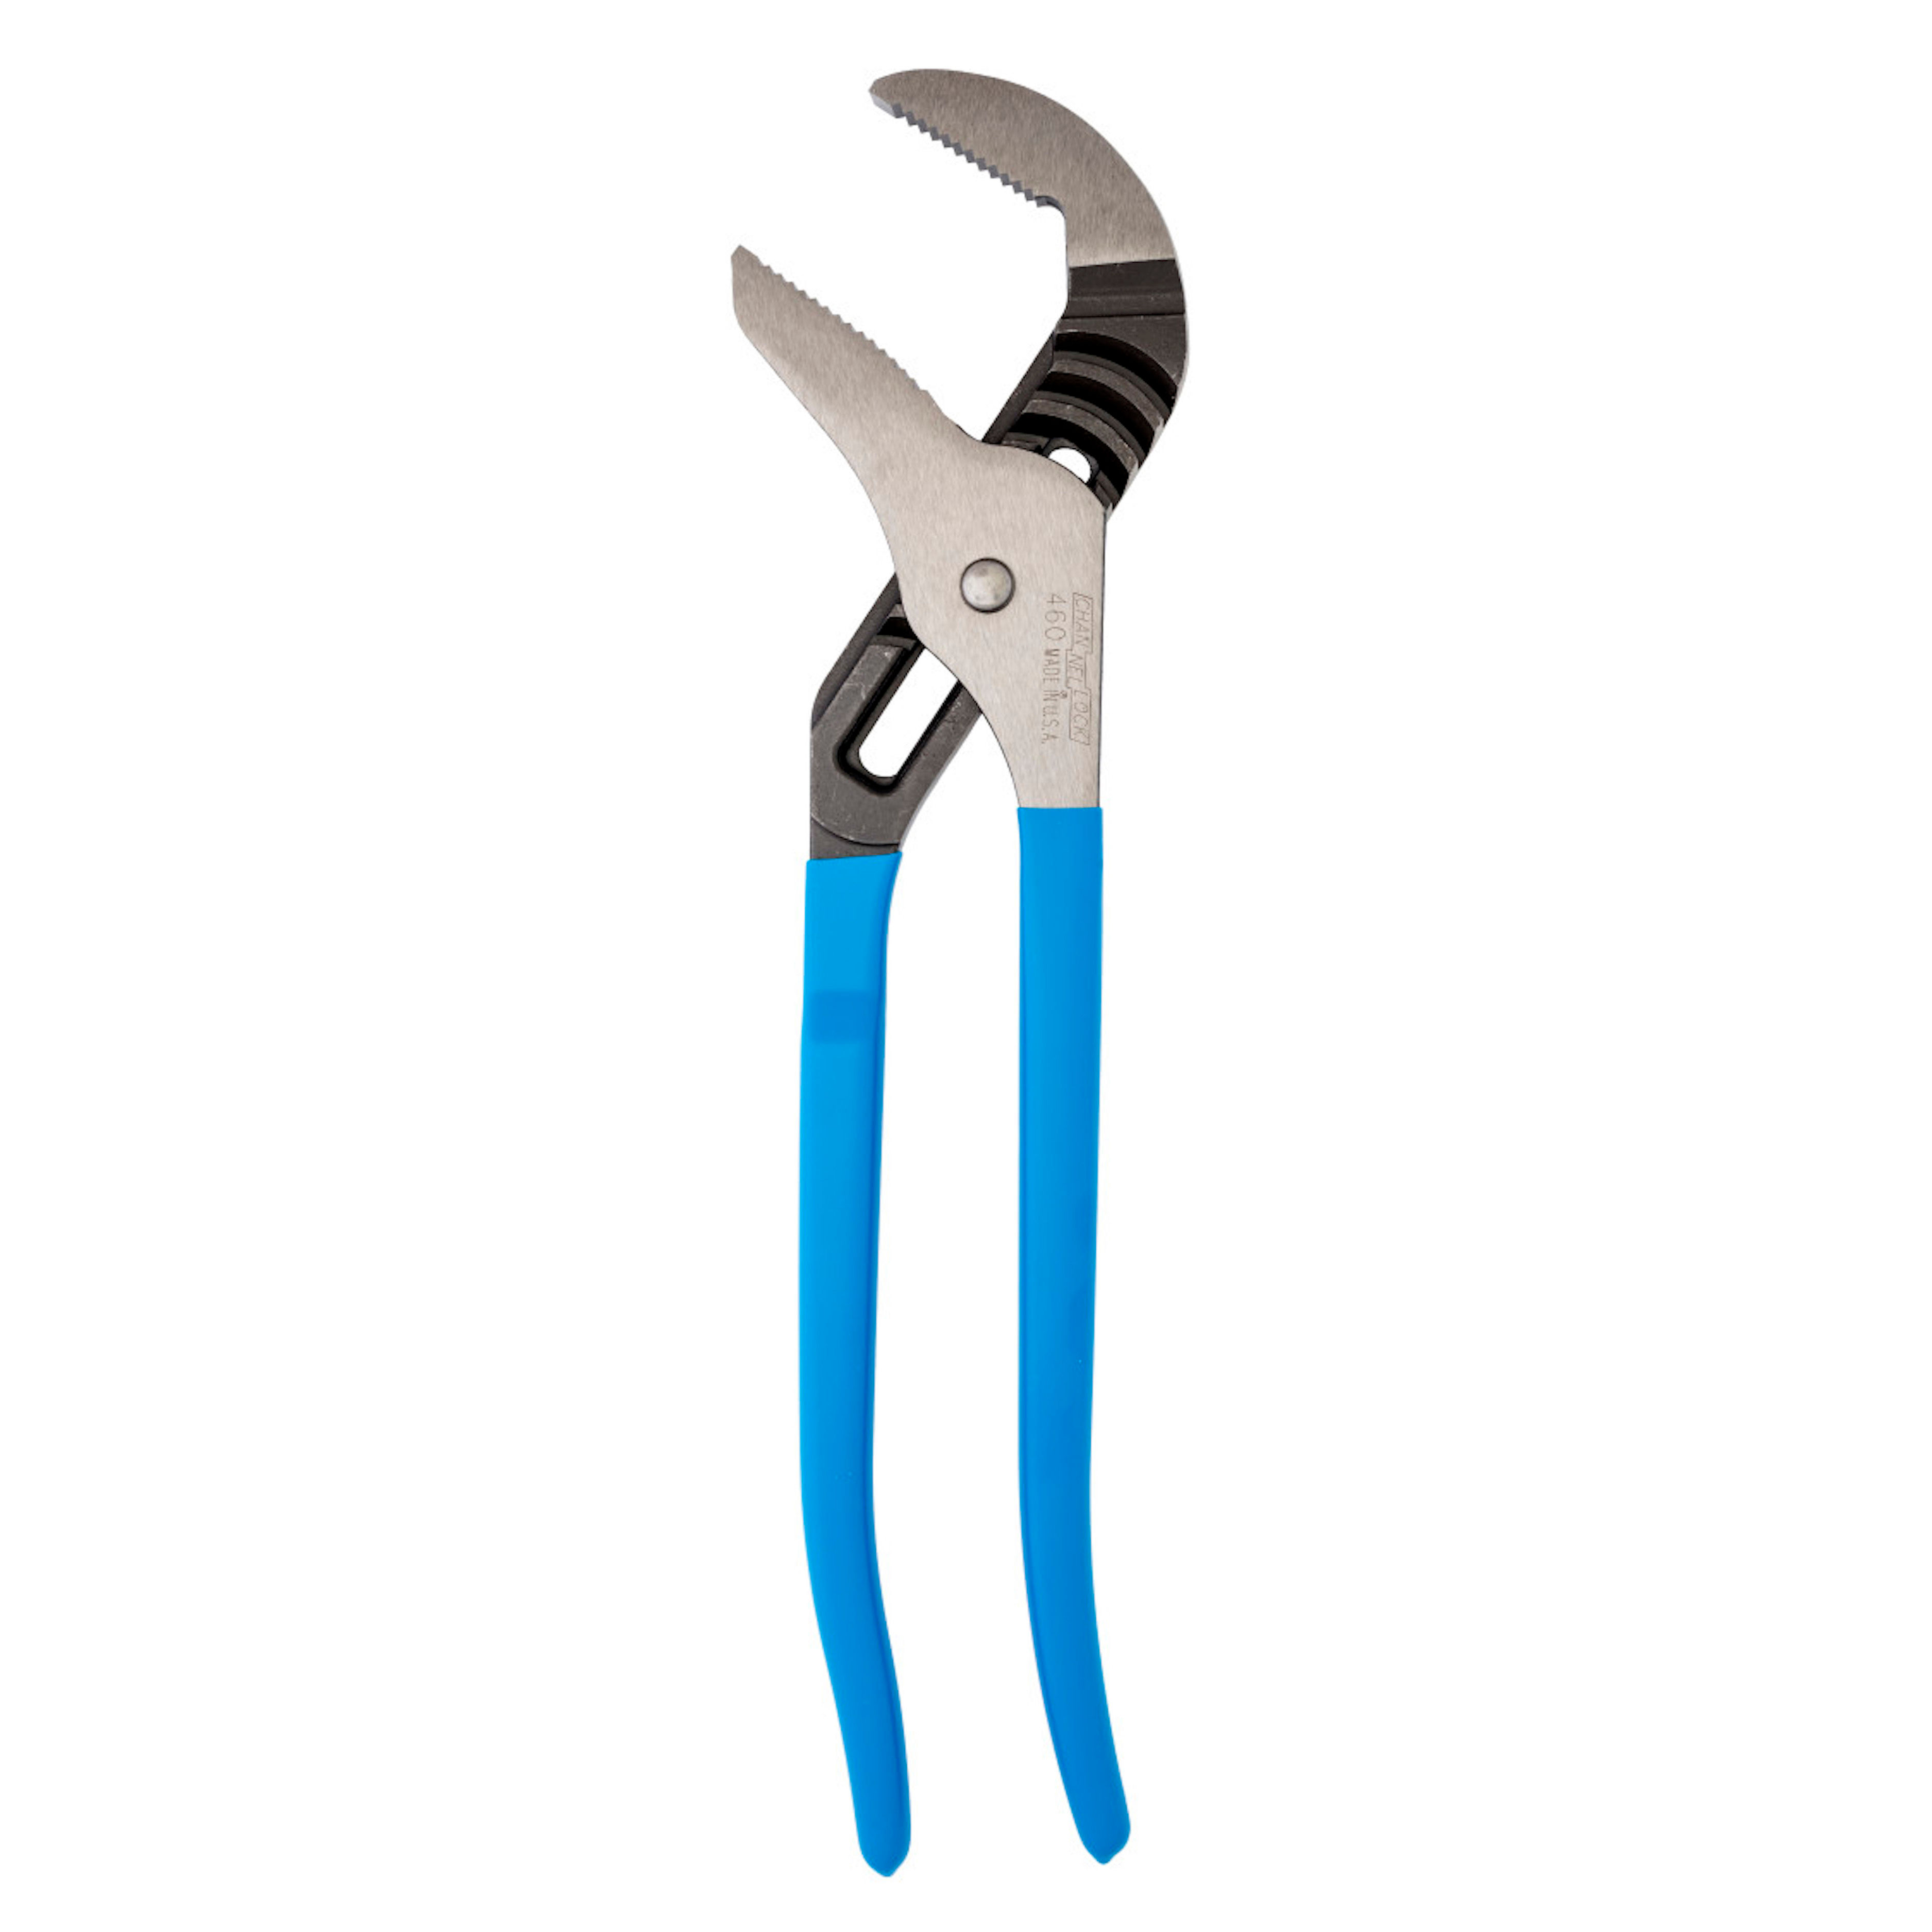 Channellock Straight Jaw Tongue and Groove Pliers